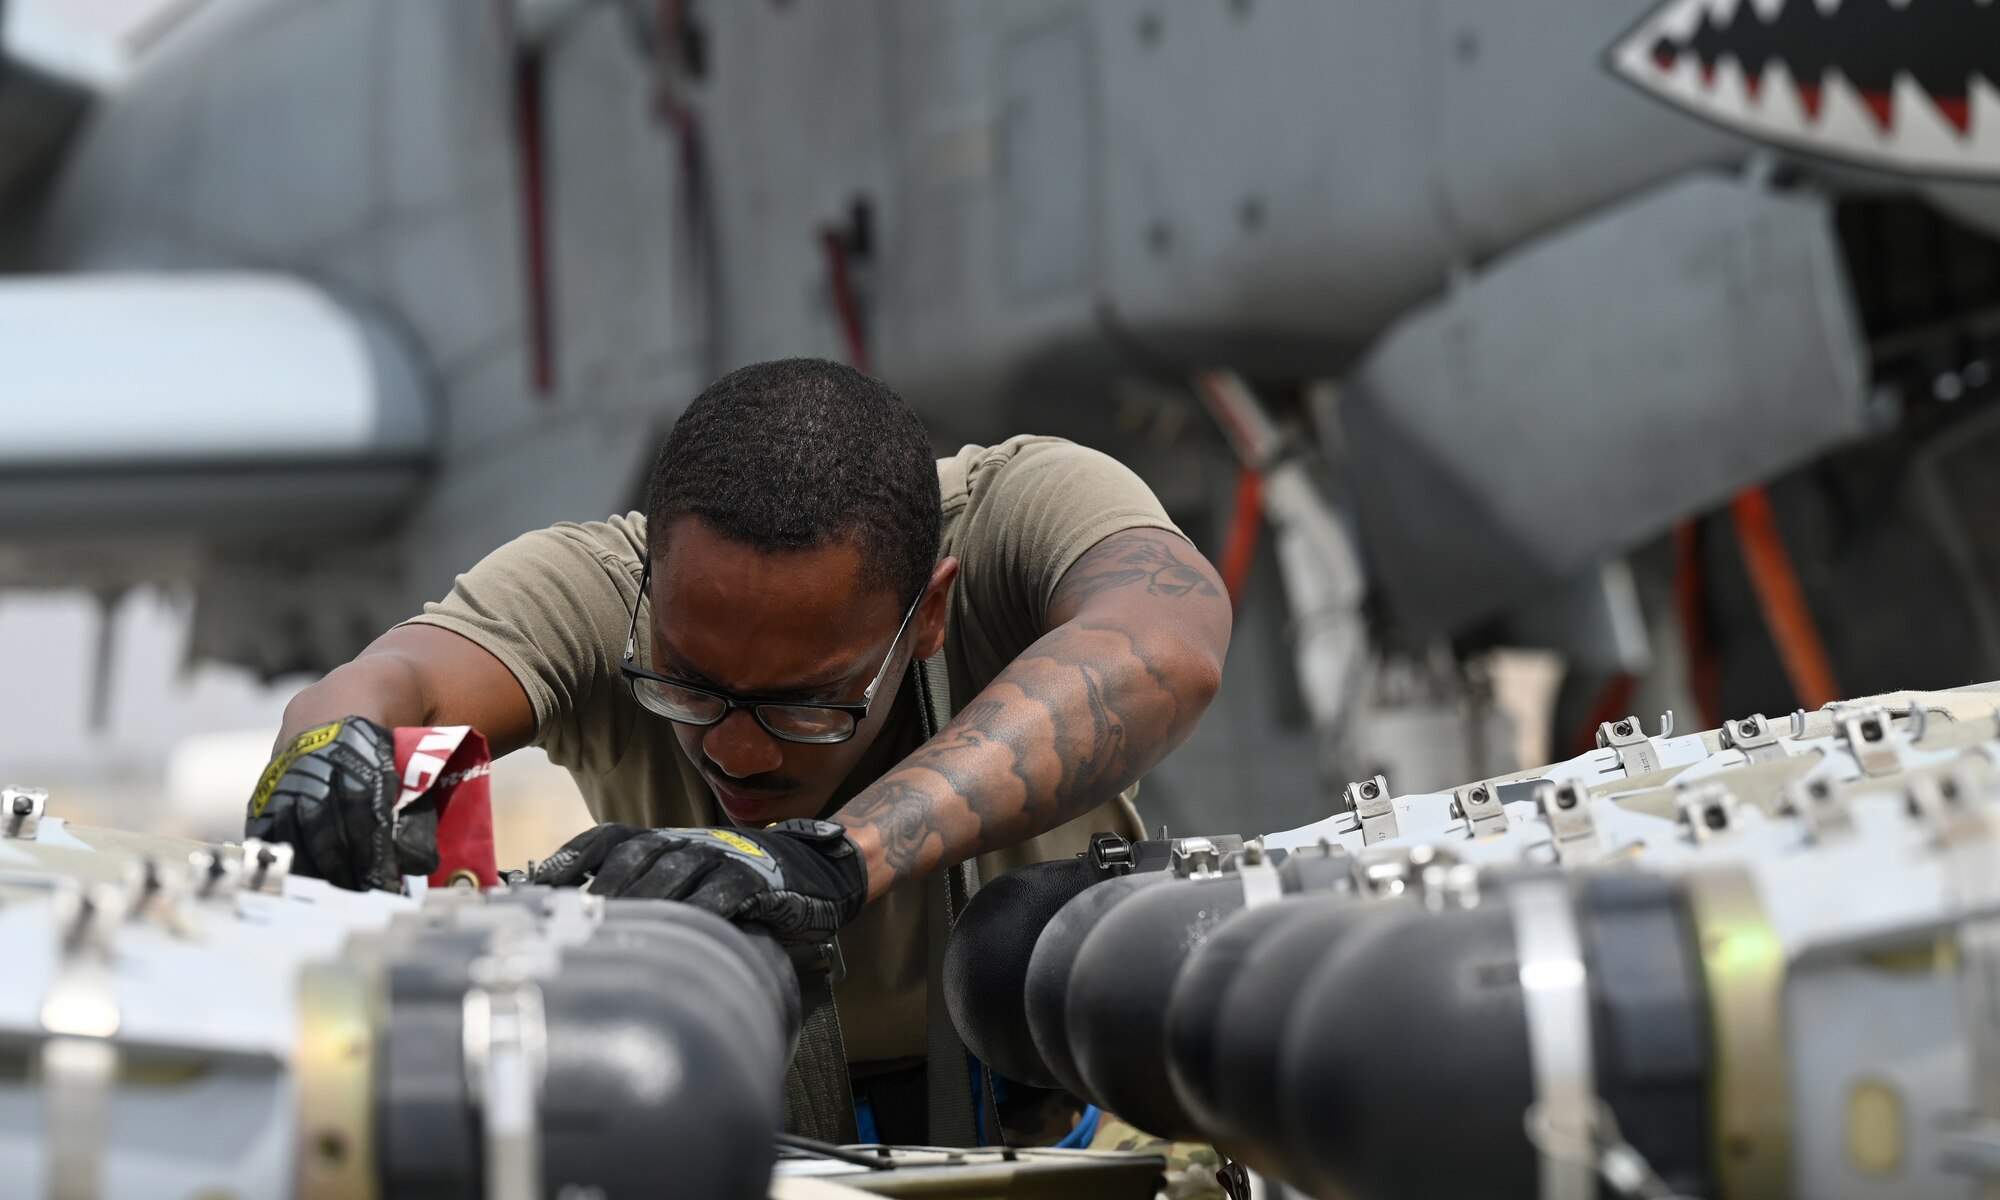 U.S. Air Force Staff Sgt. Brian Dorsey, 75th Expeditionary Fighter Generation Squadron squadron lead crew chief, prepares munitions to be loaded onto a U.S. Air Force A-10 Thunderbolt II at Al Dhafra Air Base, United Arab Emirates, April 18, 2022. The loading of these munitions represents another step forward in the deployment of the A-10 to the U.S. Central Command area of responsibility, which offers the opportunity for 9th Air Force (Air Forces Central). to experiment with CAS capabilities in order to achieve the most robust, diverse force possible. Ninth AF (AFCENT) is committed to ensuring security and stability alongside our partners in the U.S. Central Command area of responsibility. (U.S. Air Force photo by Tech. Sgt. Alex Fox Echols III)